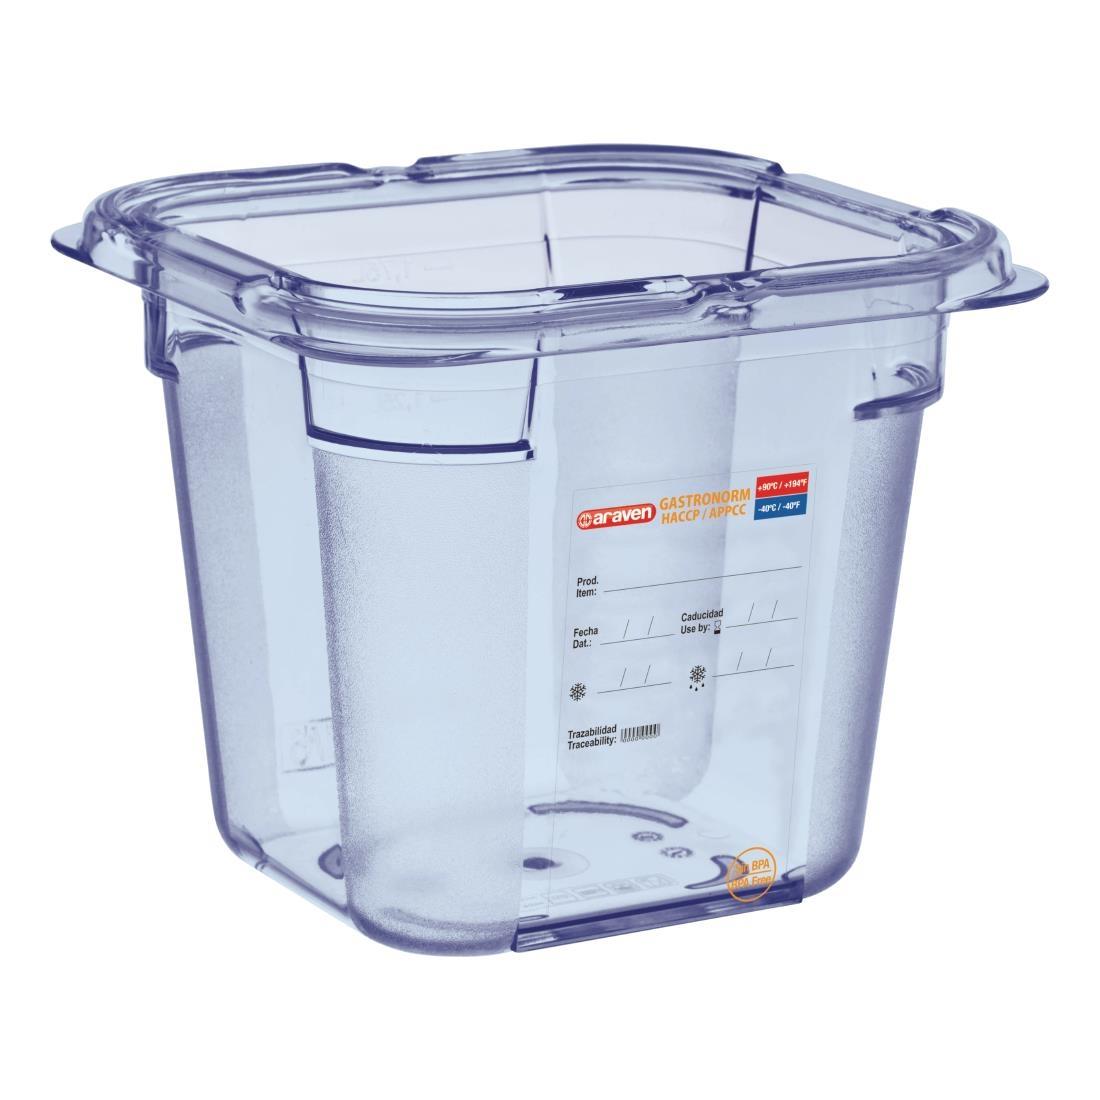 Araven ABS Food Storage Container Blue GN 1/6 150mm - GP572  - 1